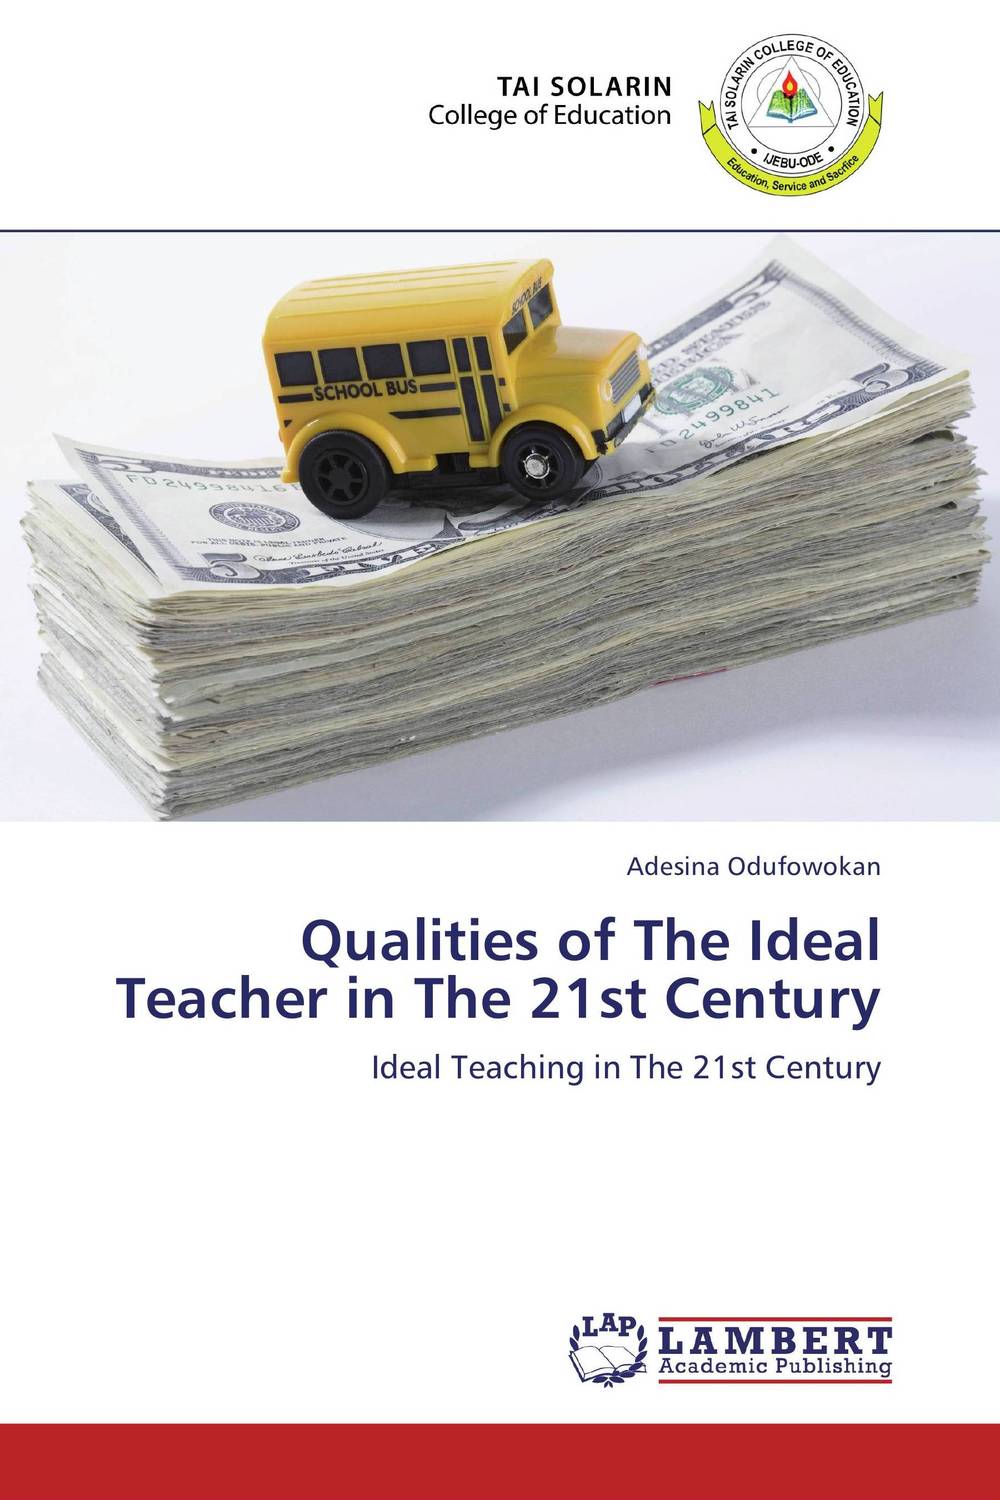 Qualities of The Ideal Teacher in The 21st Century